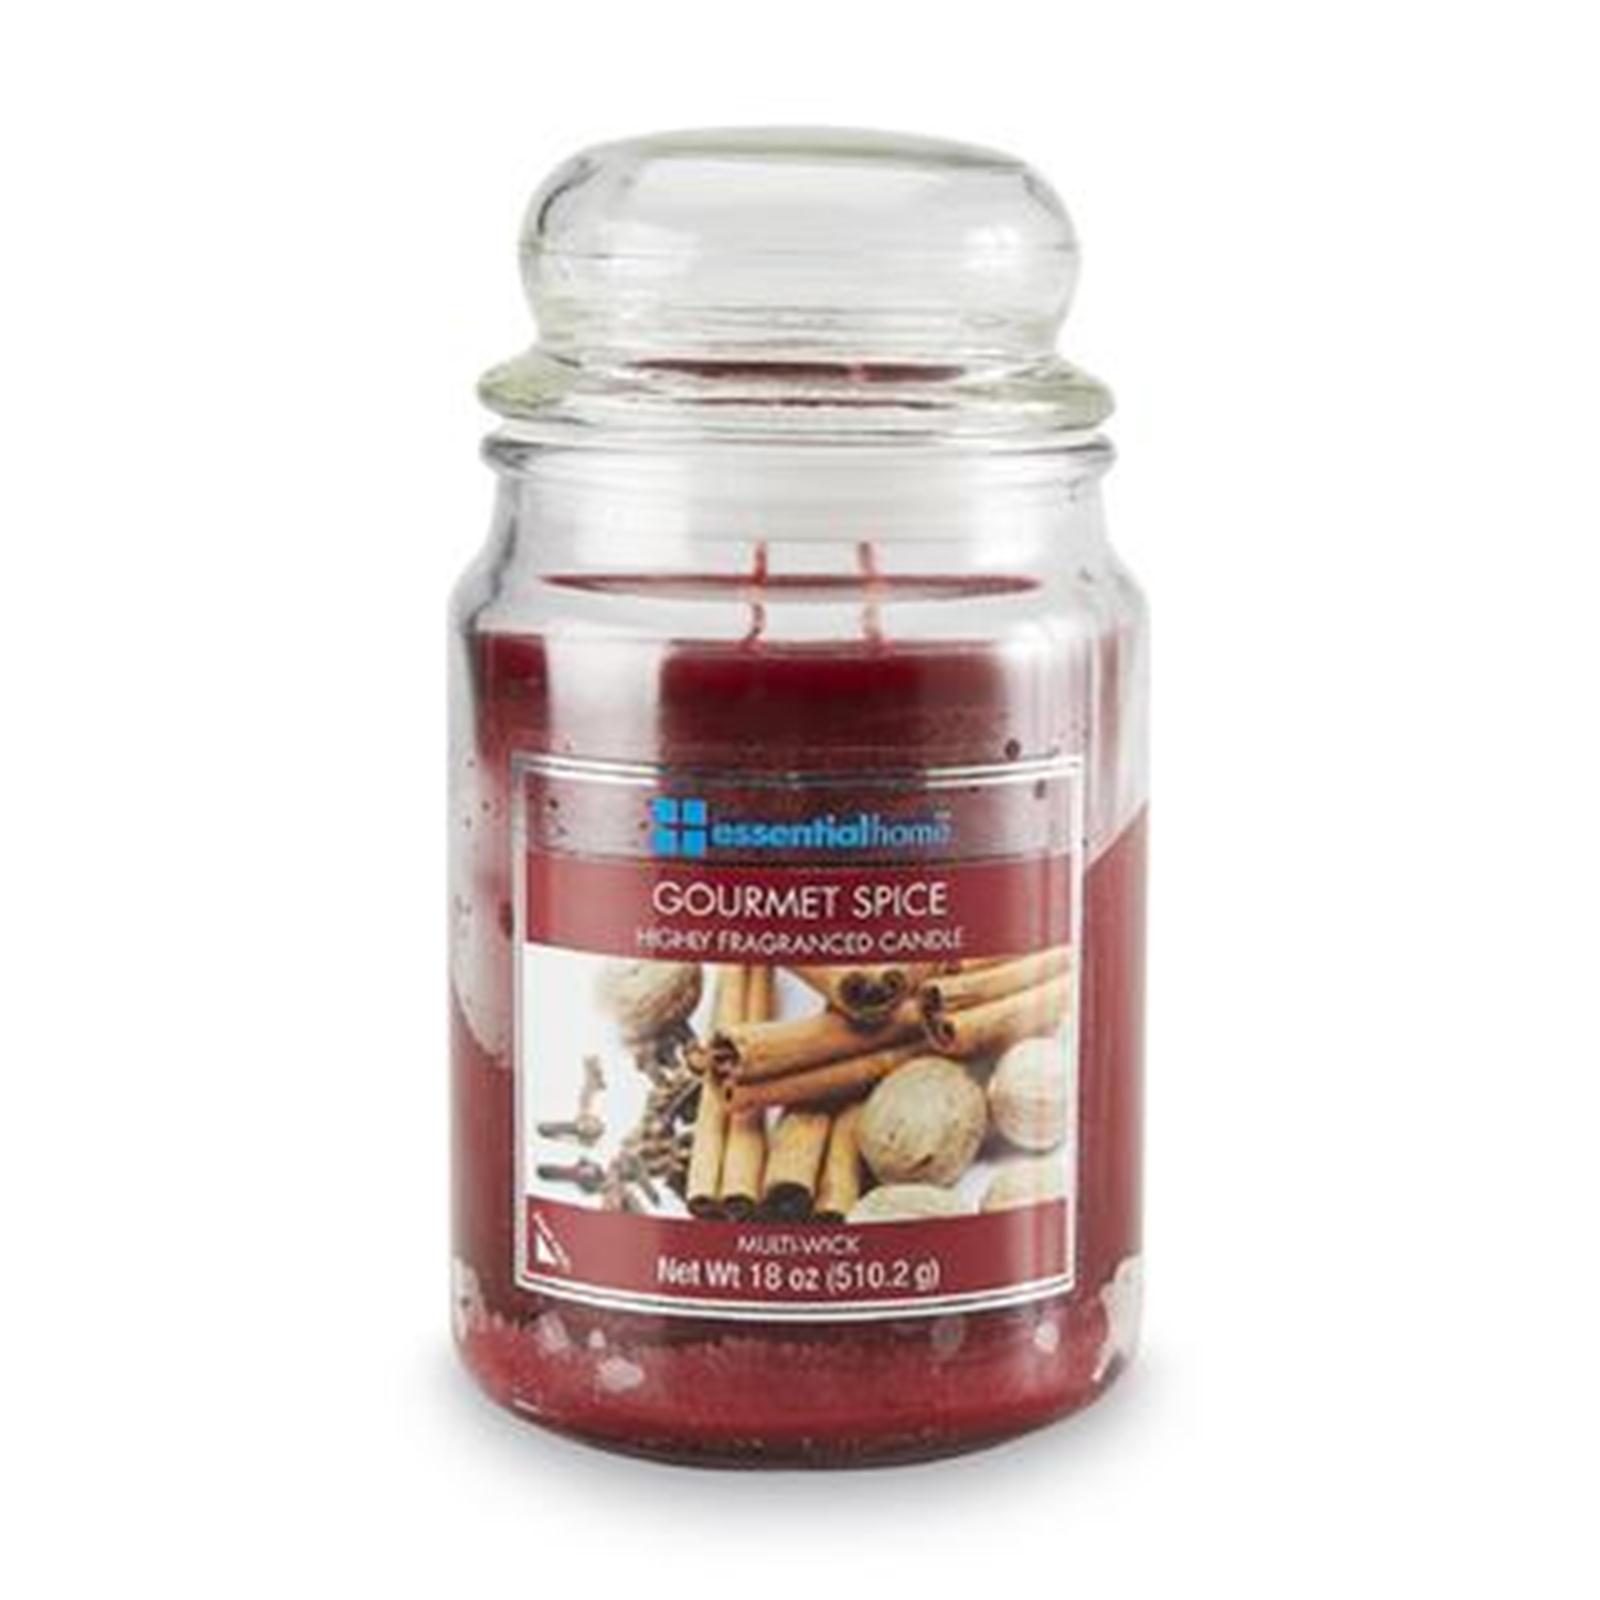 Essential Home 18-Ounce Jar Candle - Gourmet Spice